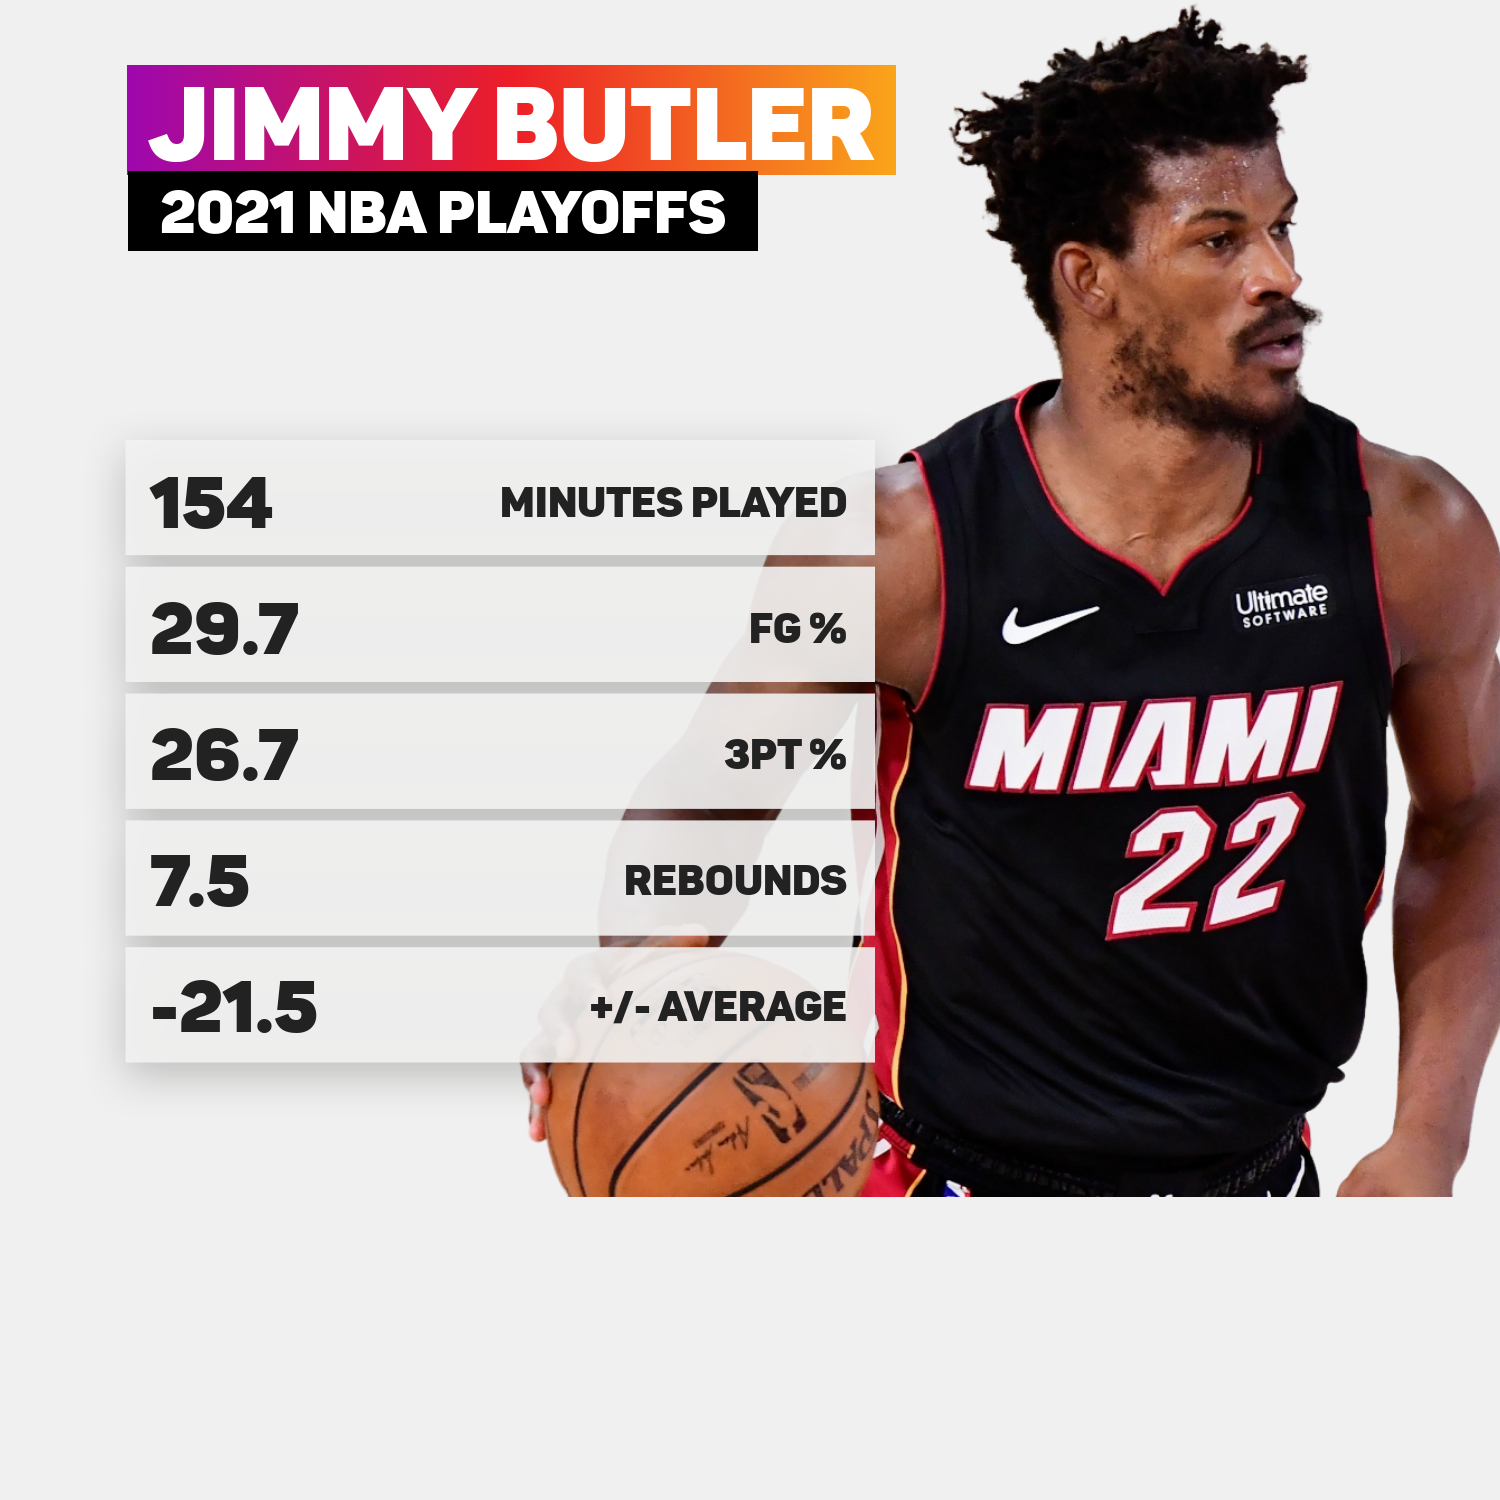 Jimmy Butler 2021 NBA playoffs in numbers